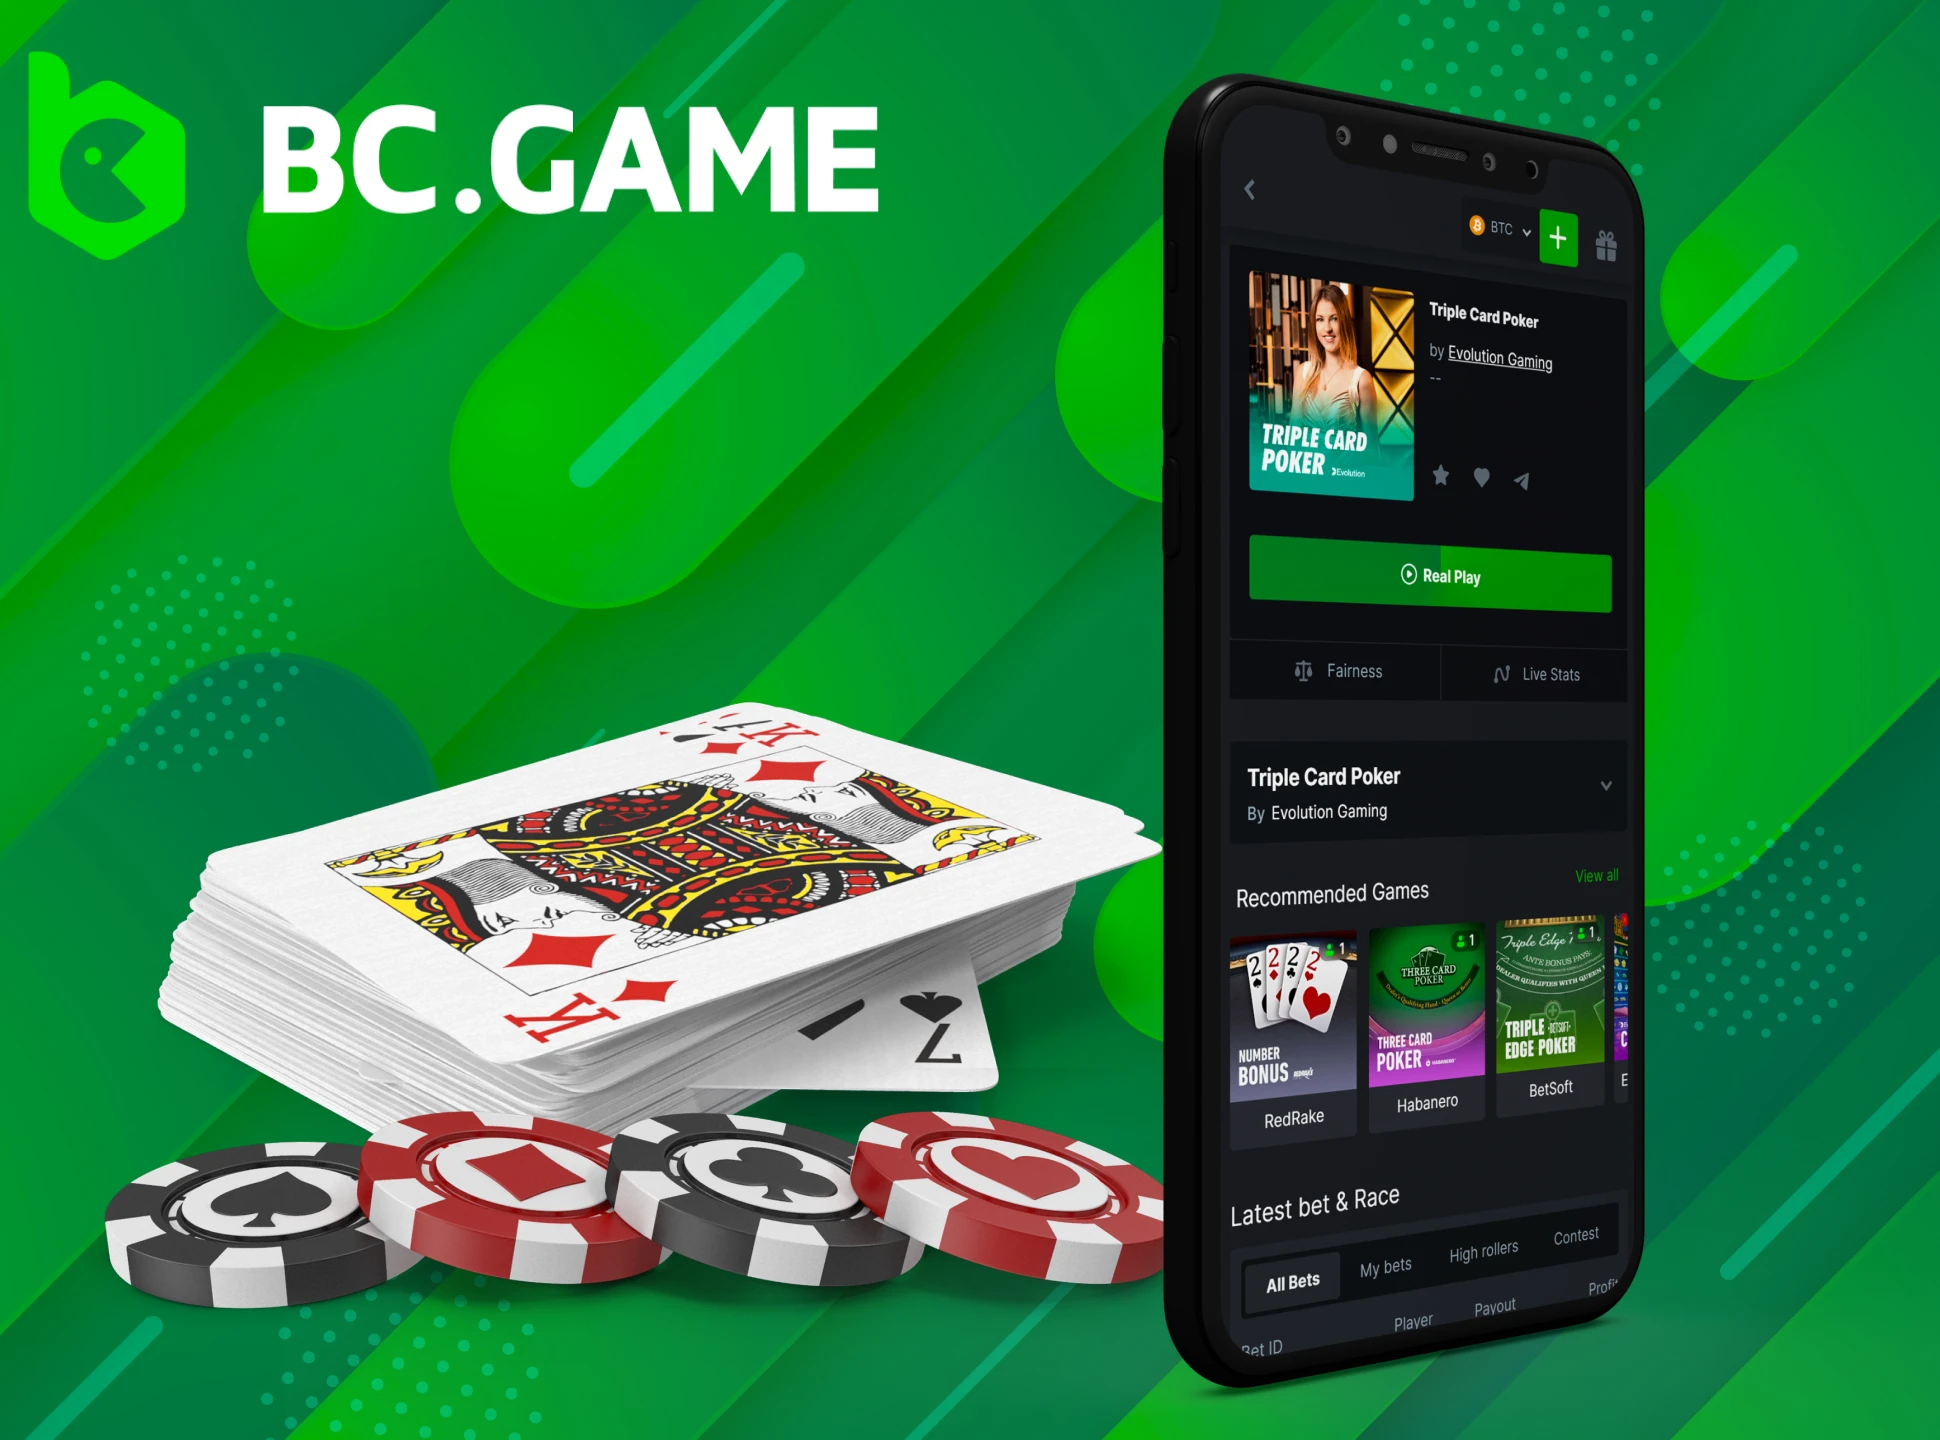 Play the most popular live poker games on the BC Game casino app.